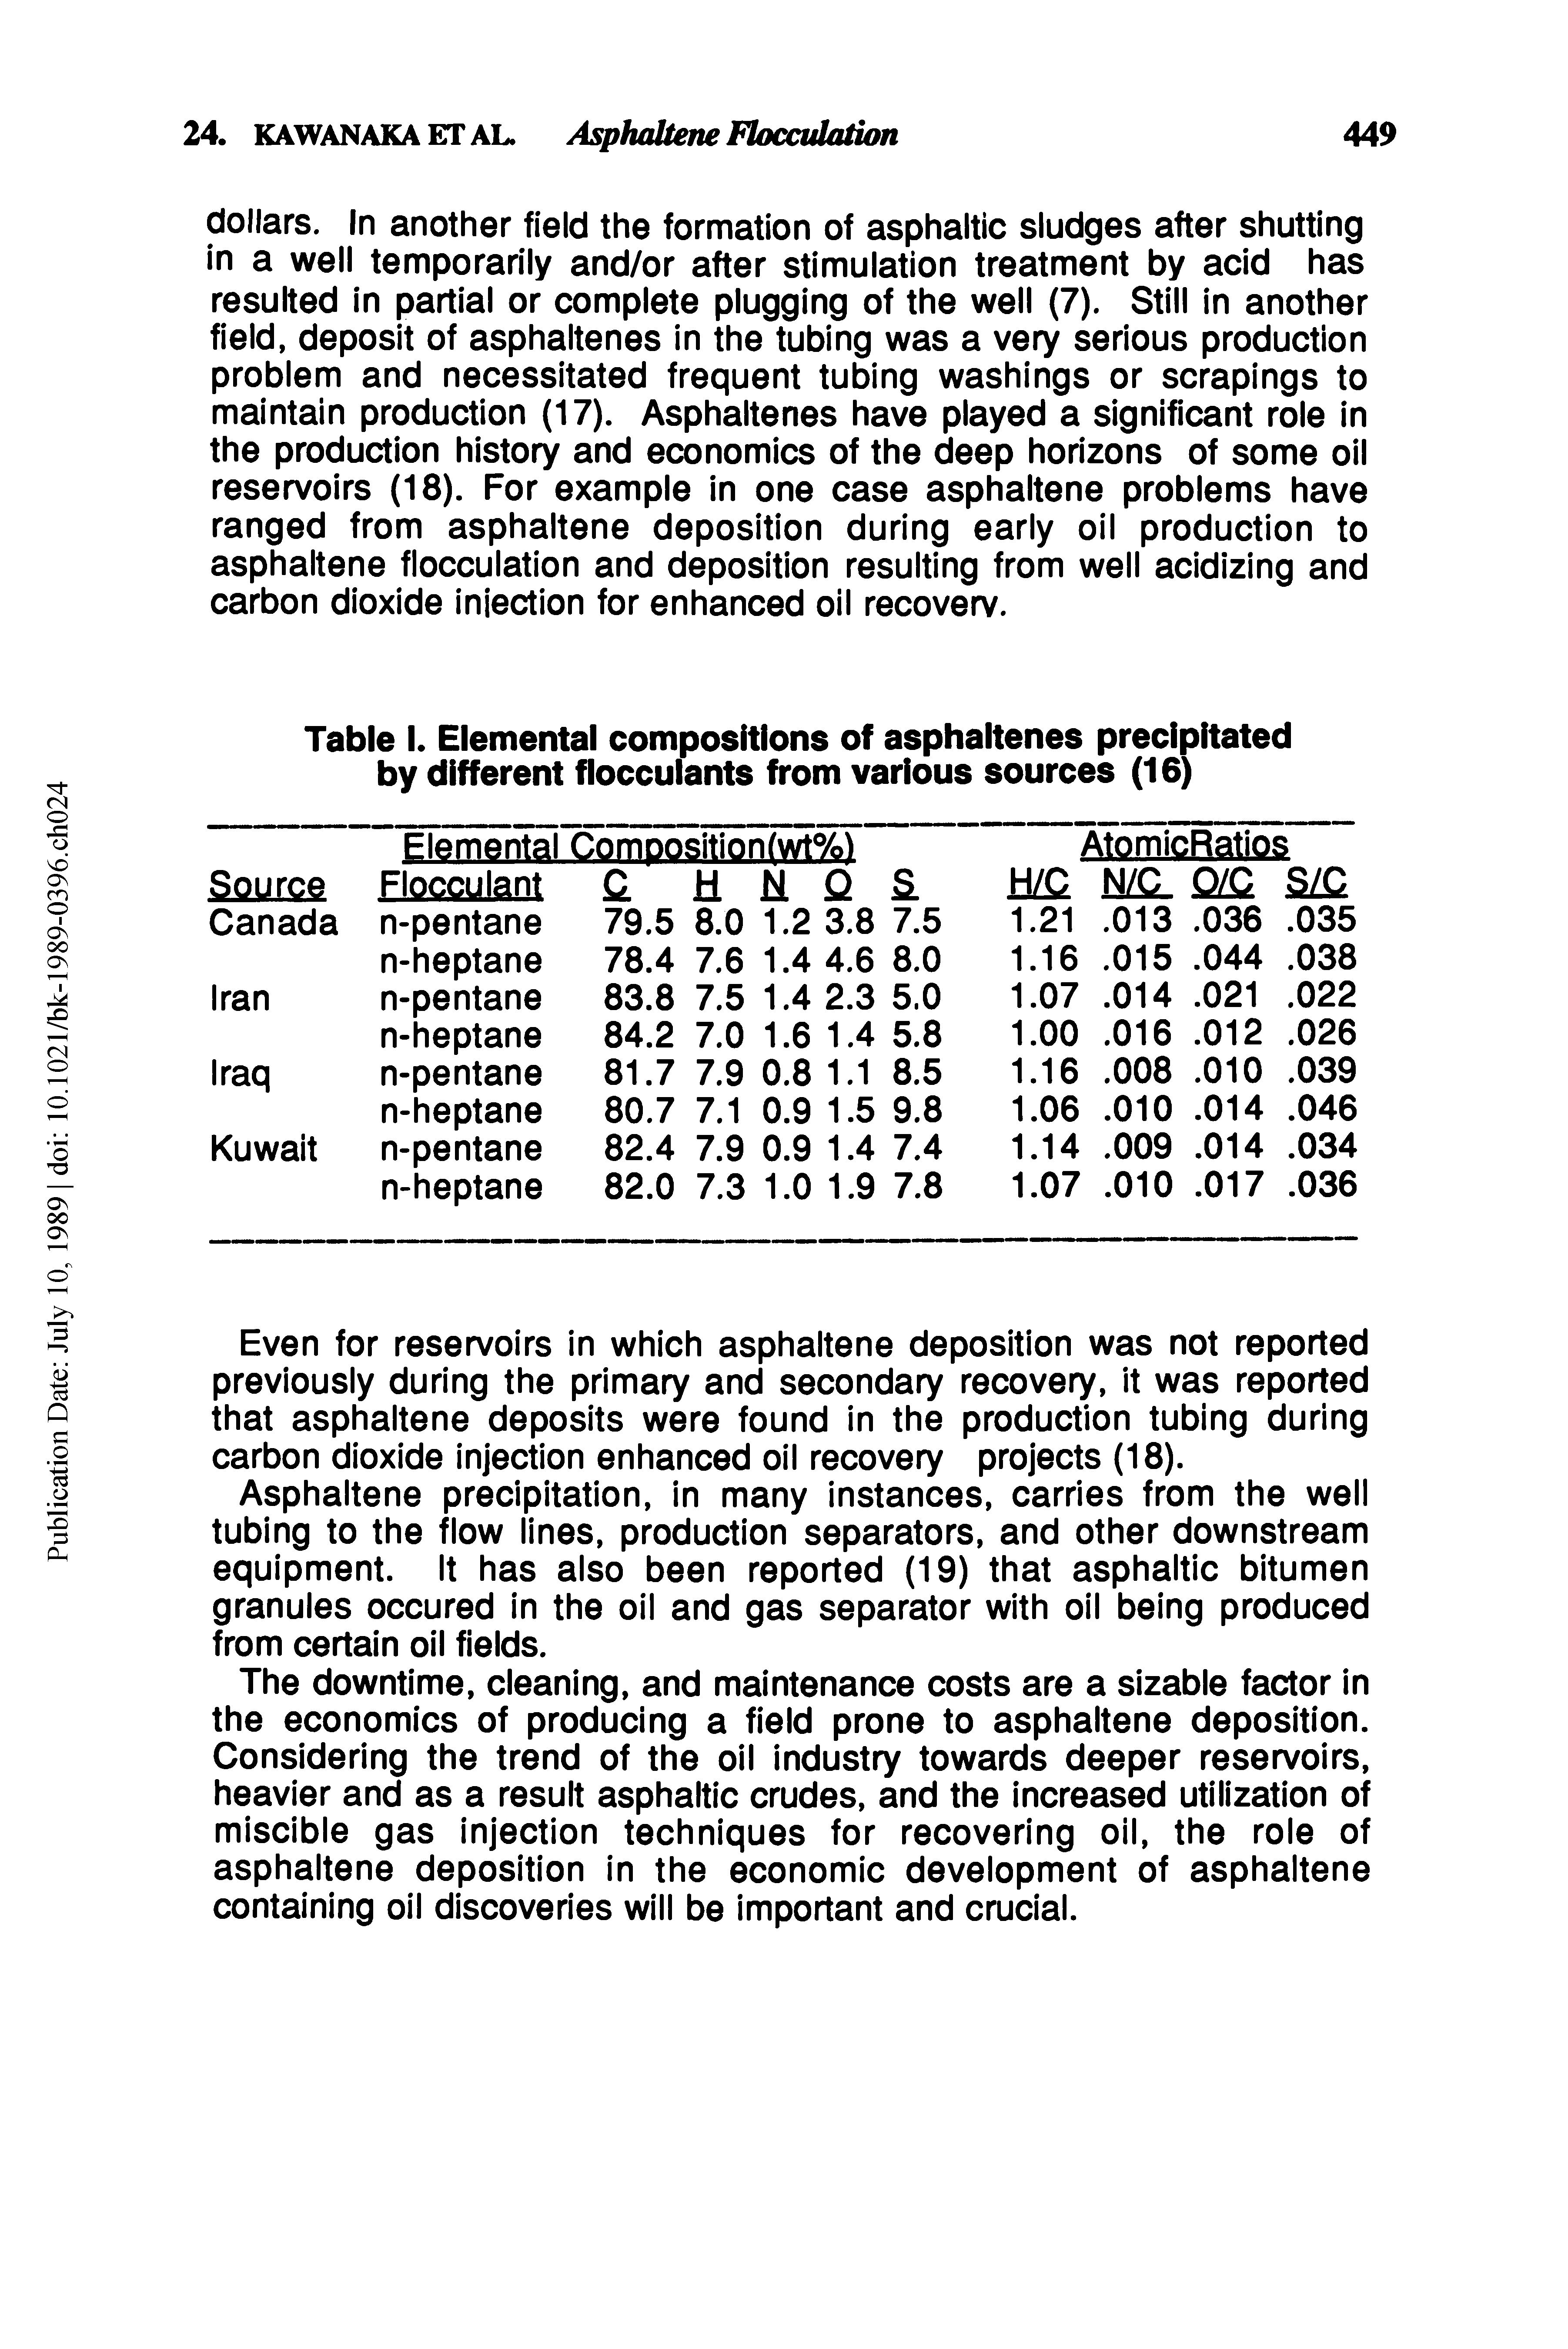 Table I. Elemental compositions of asphaltenes precipitated by different flocculants from various sources (16)...